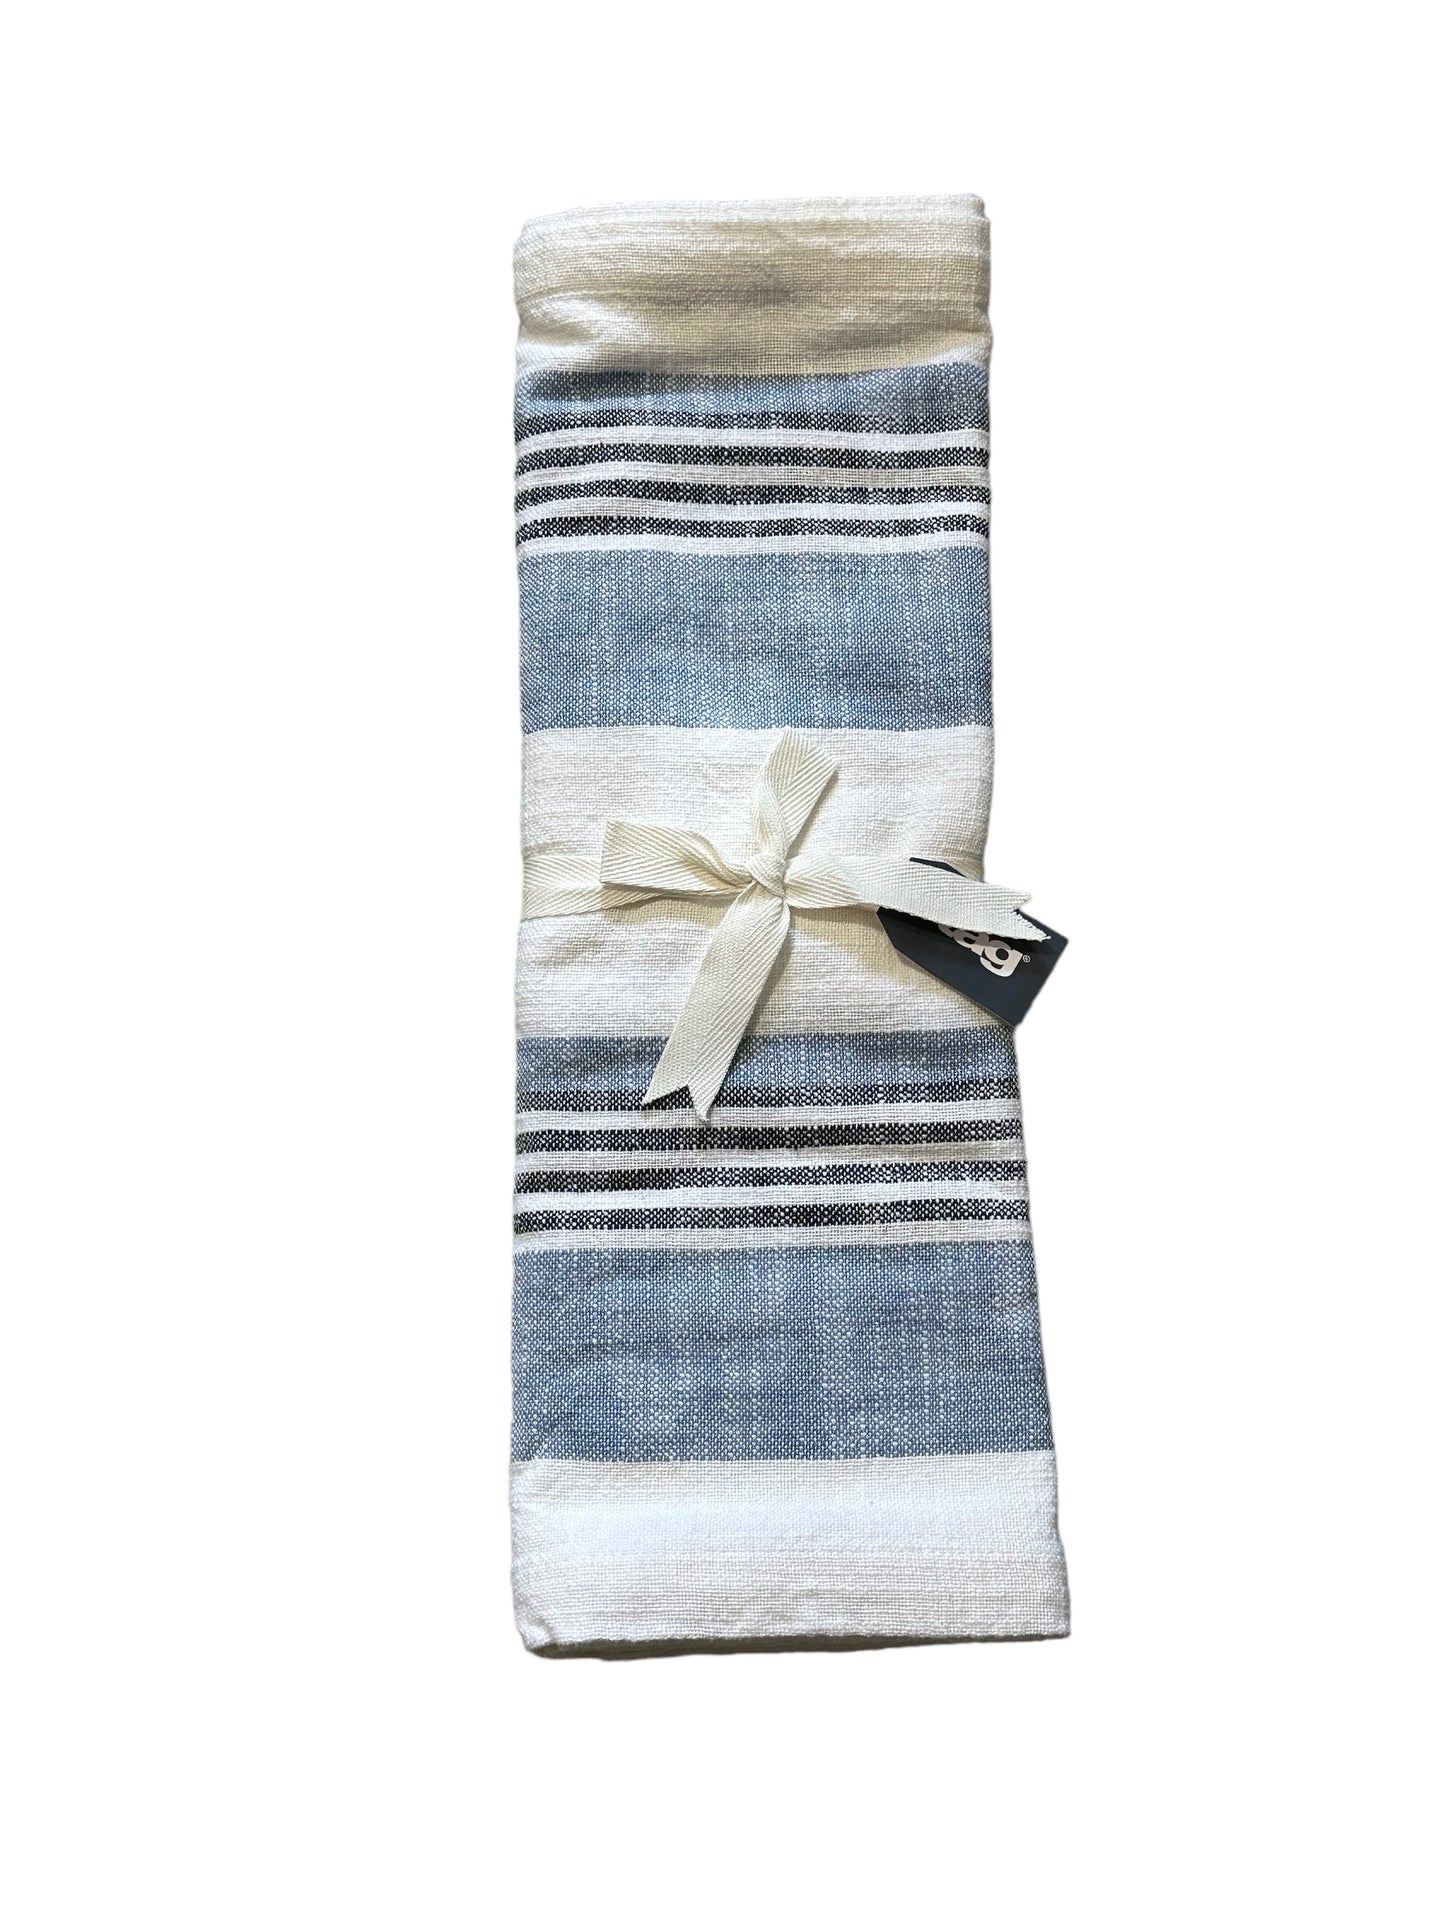 Table Runner / Blue & White Striped (TAG16614)